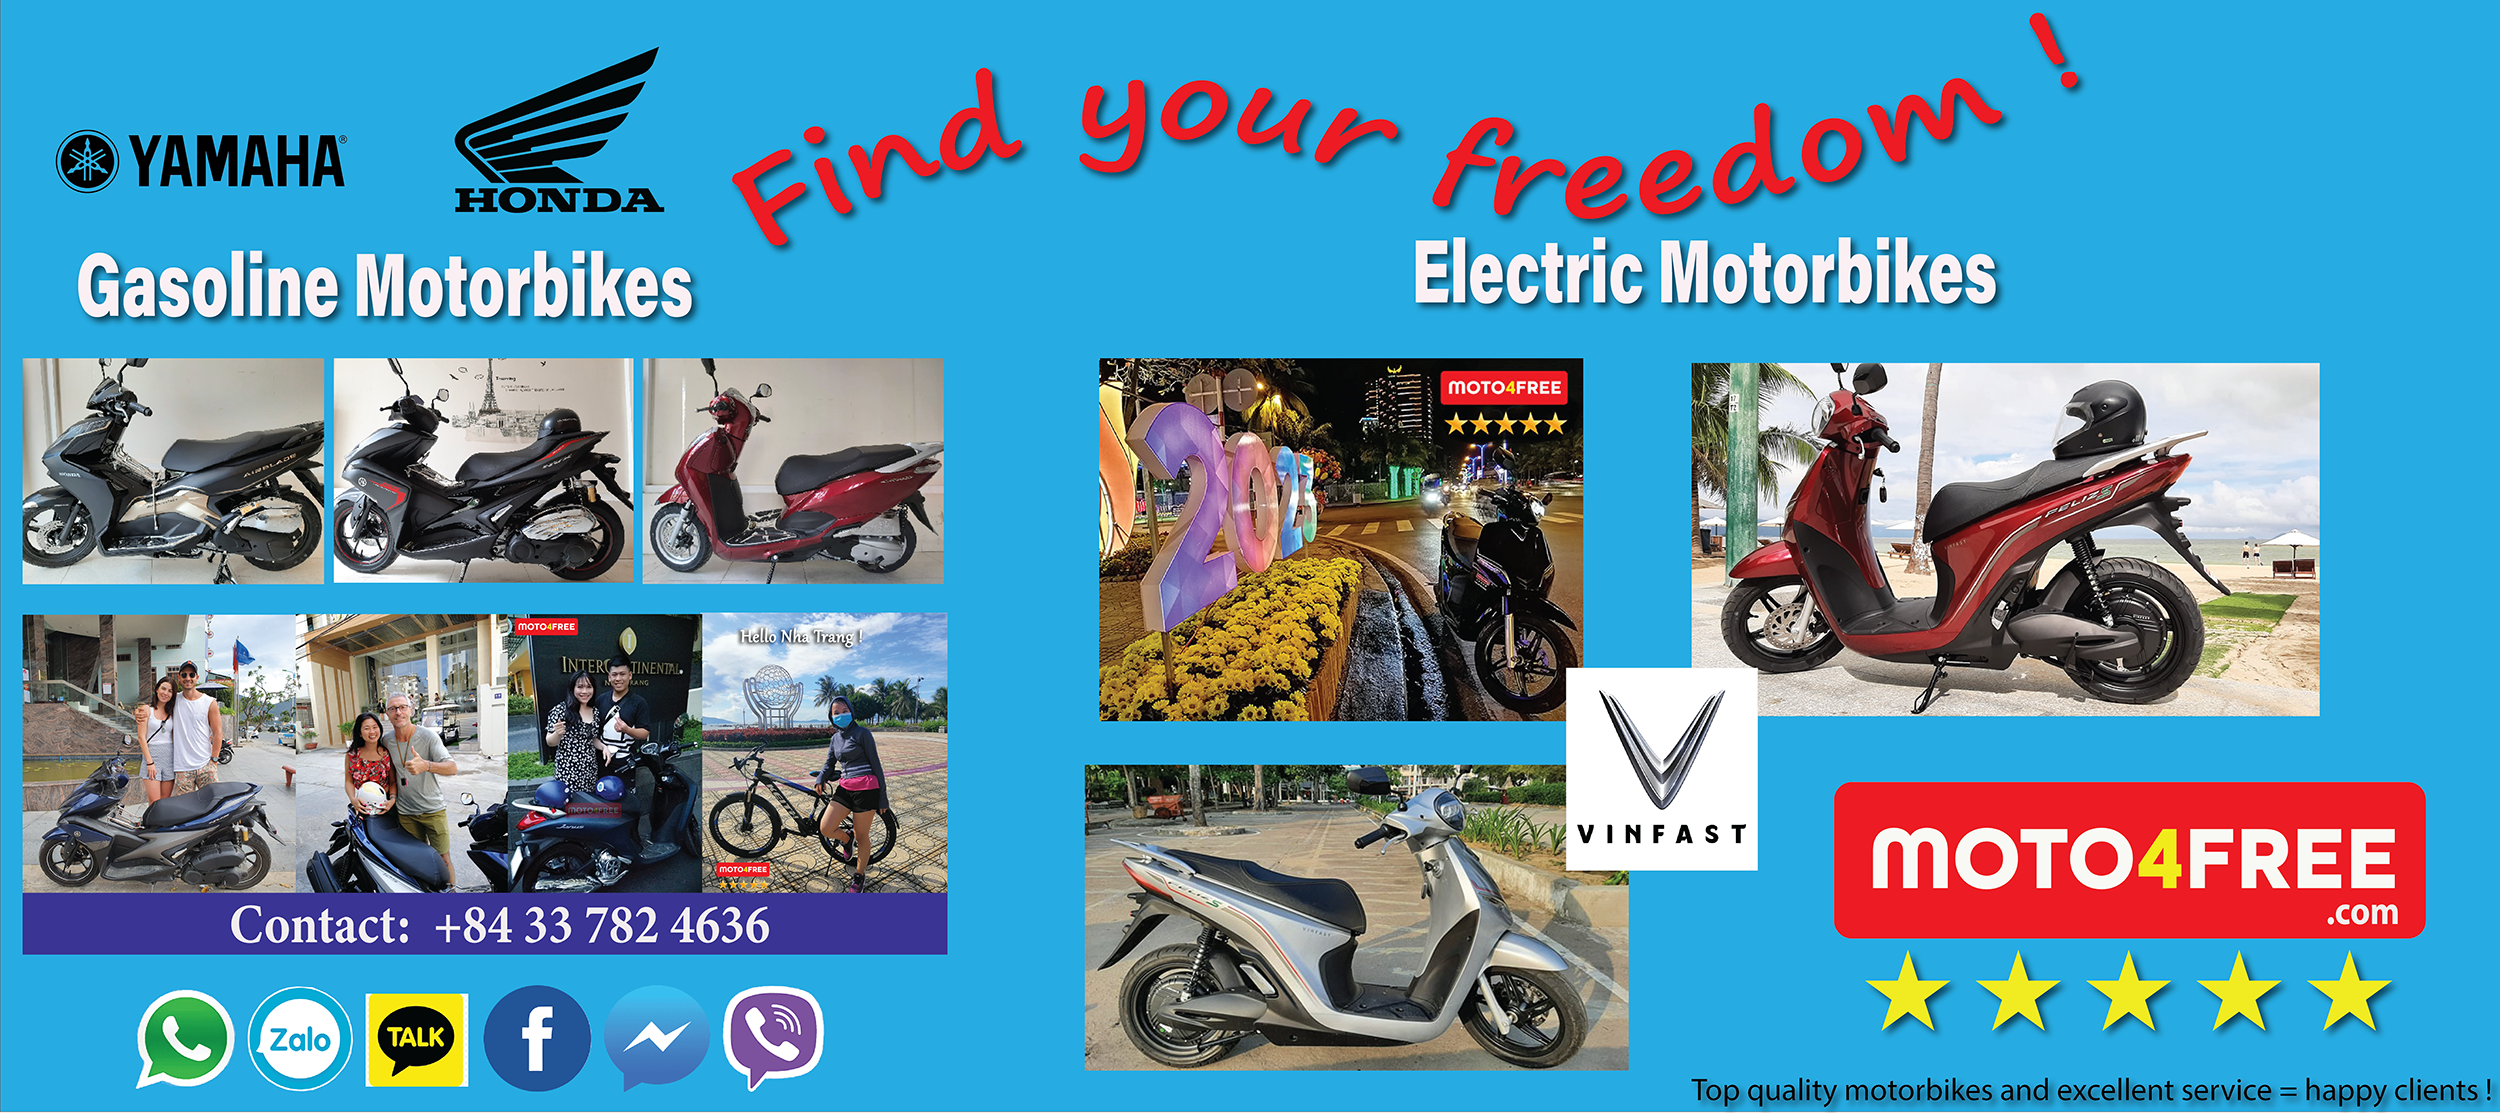 Quality Motorbike Rentals by Moto4free in Nha Trang